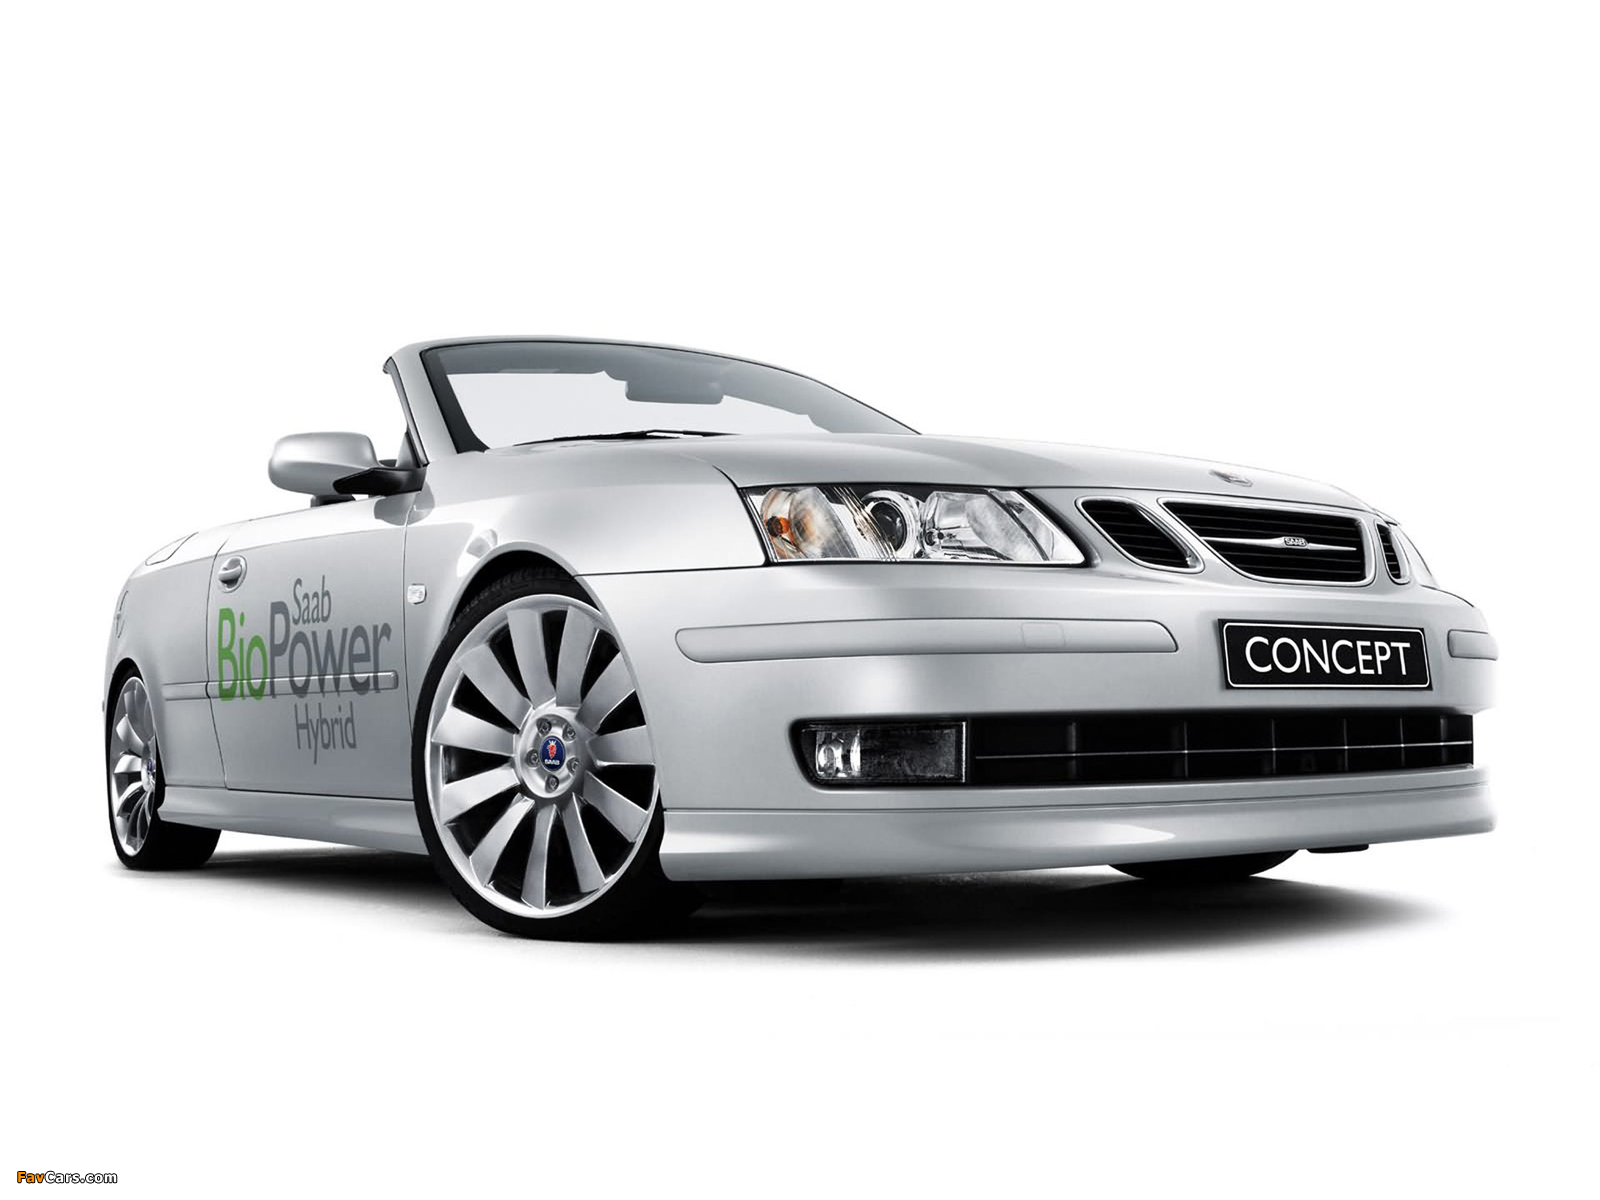 Saab 9-3 Convertible BioPower Hybrid Concept 2006 pictures (1600 x 1200)